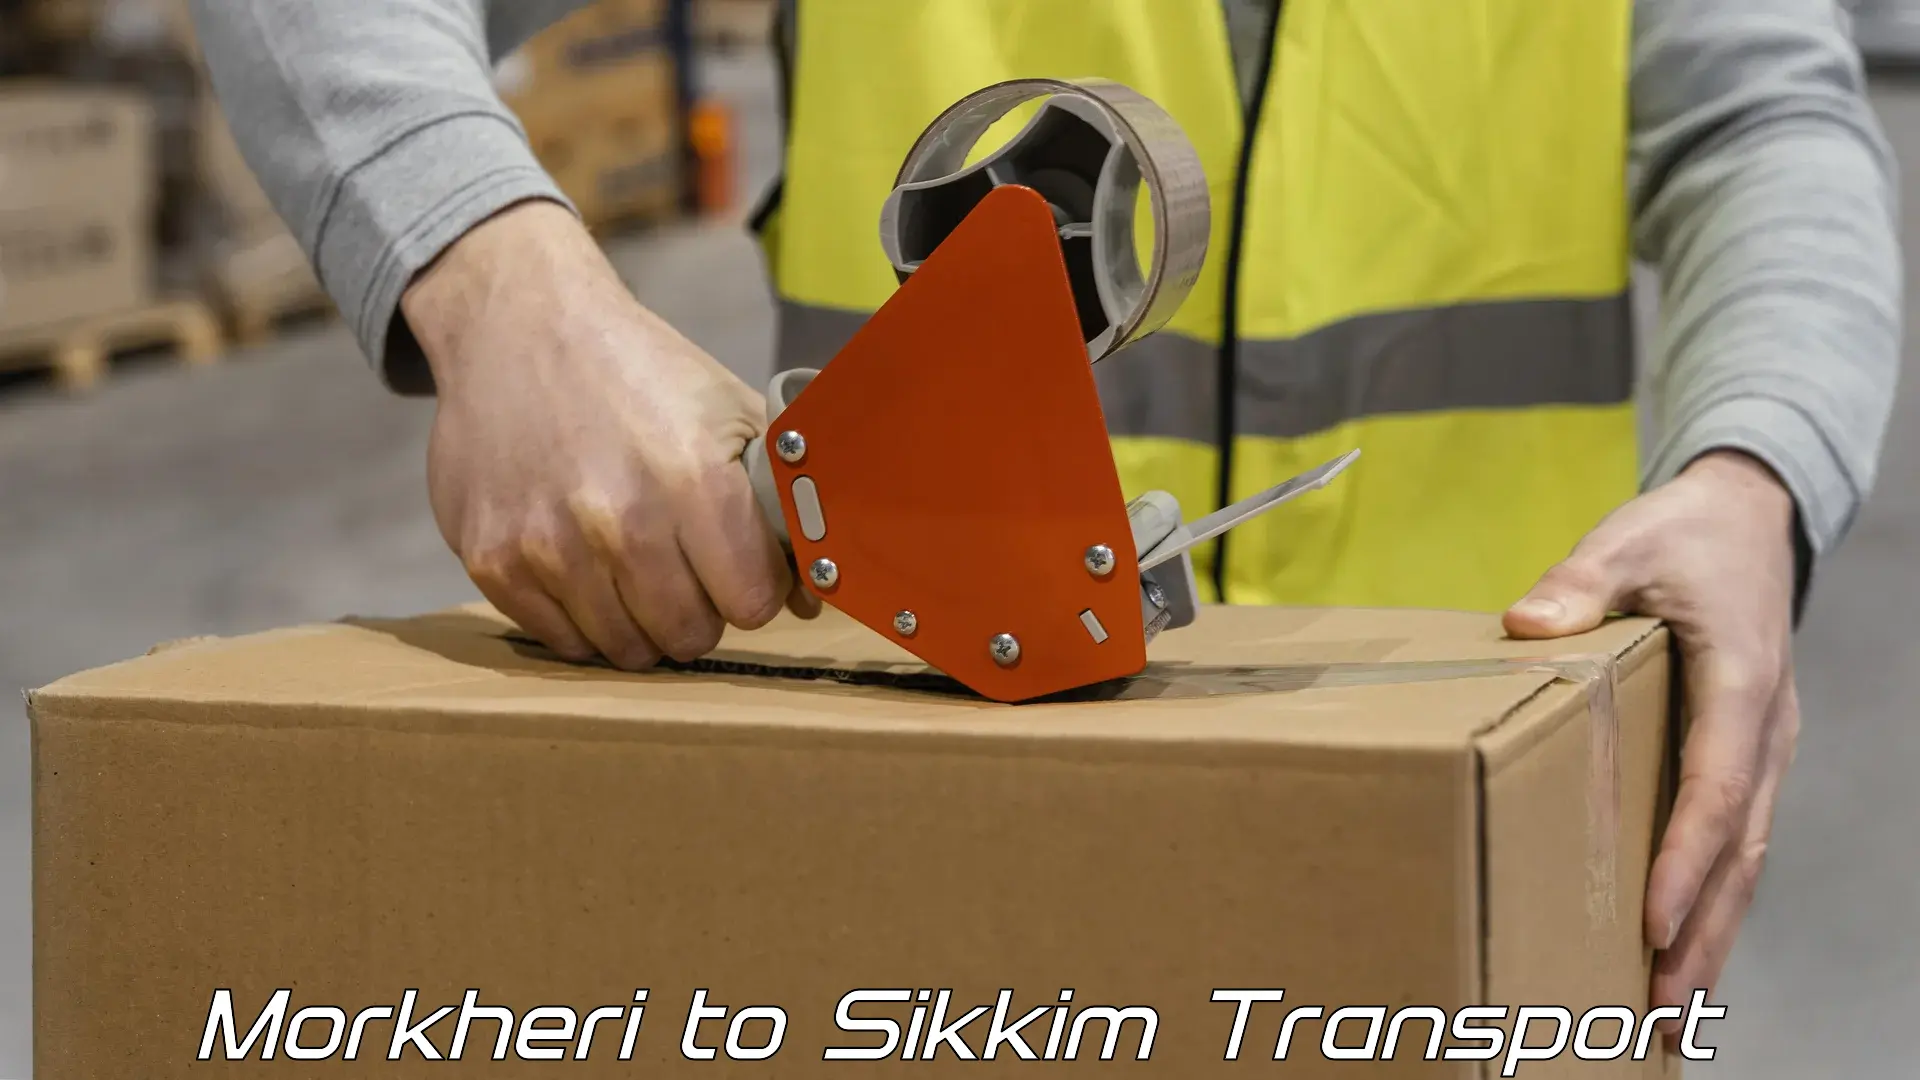 Container transport service Morkheri to Sikkim